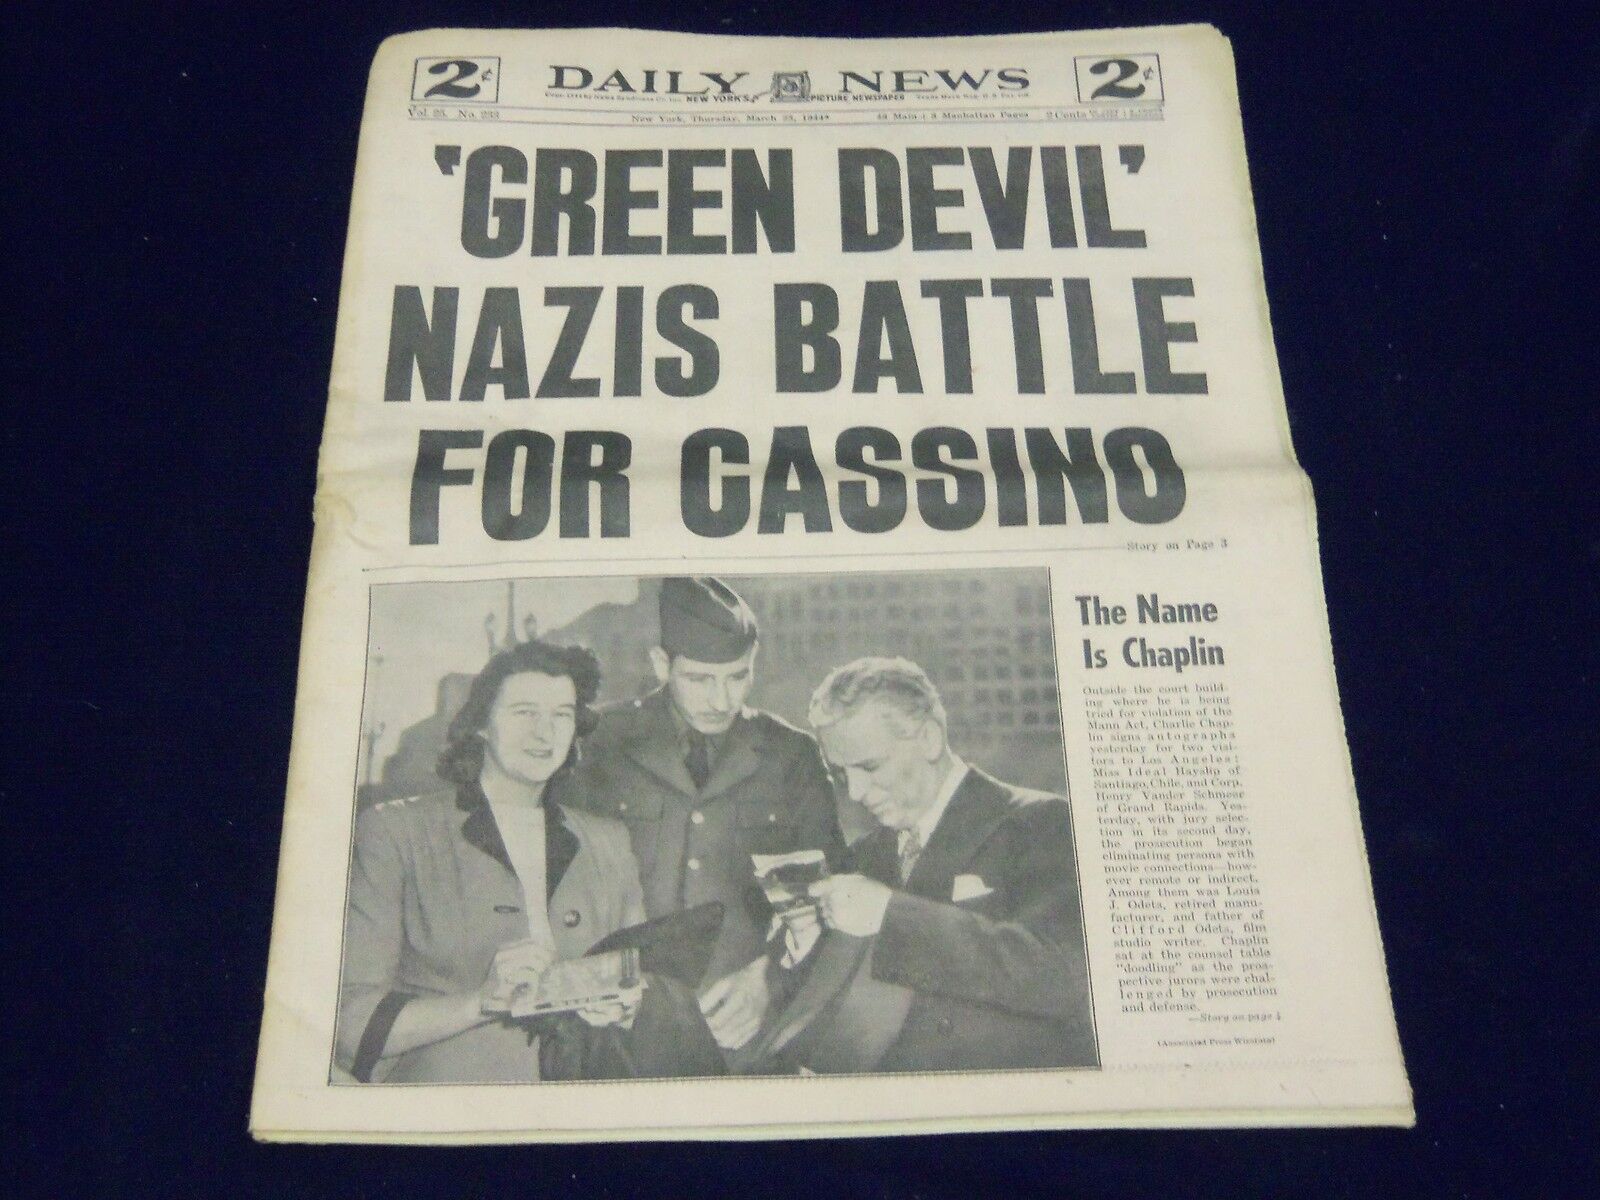 1944 MARCH 23 NEW YORK DAILY NEWS - NAZIS BATTLE FOR CASSINO - NP 1985